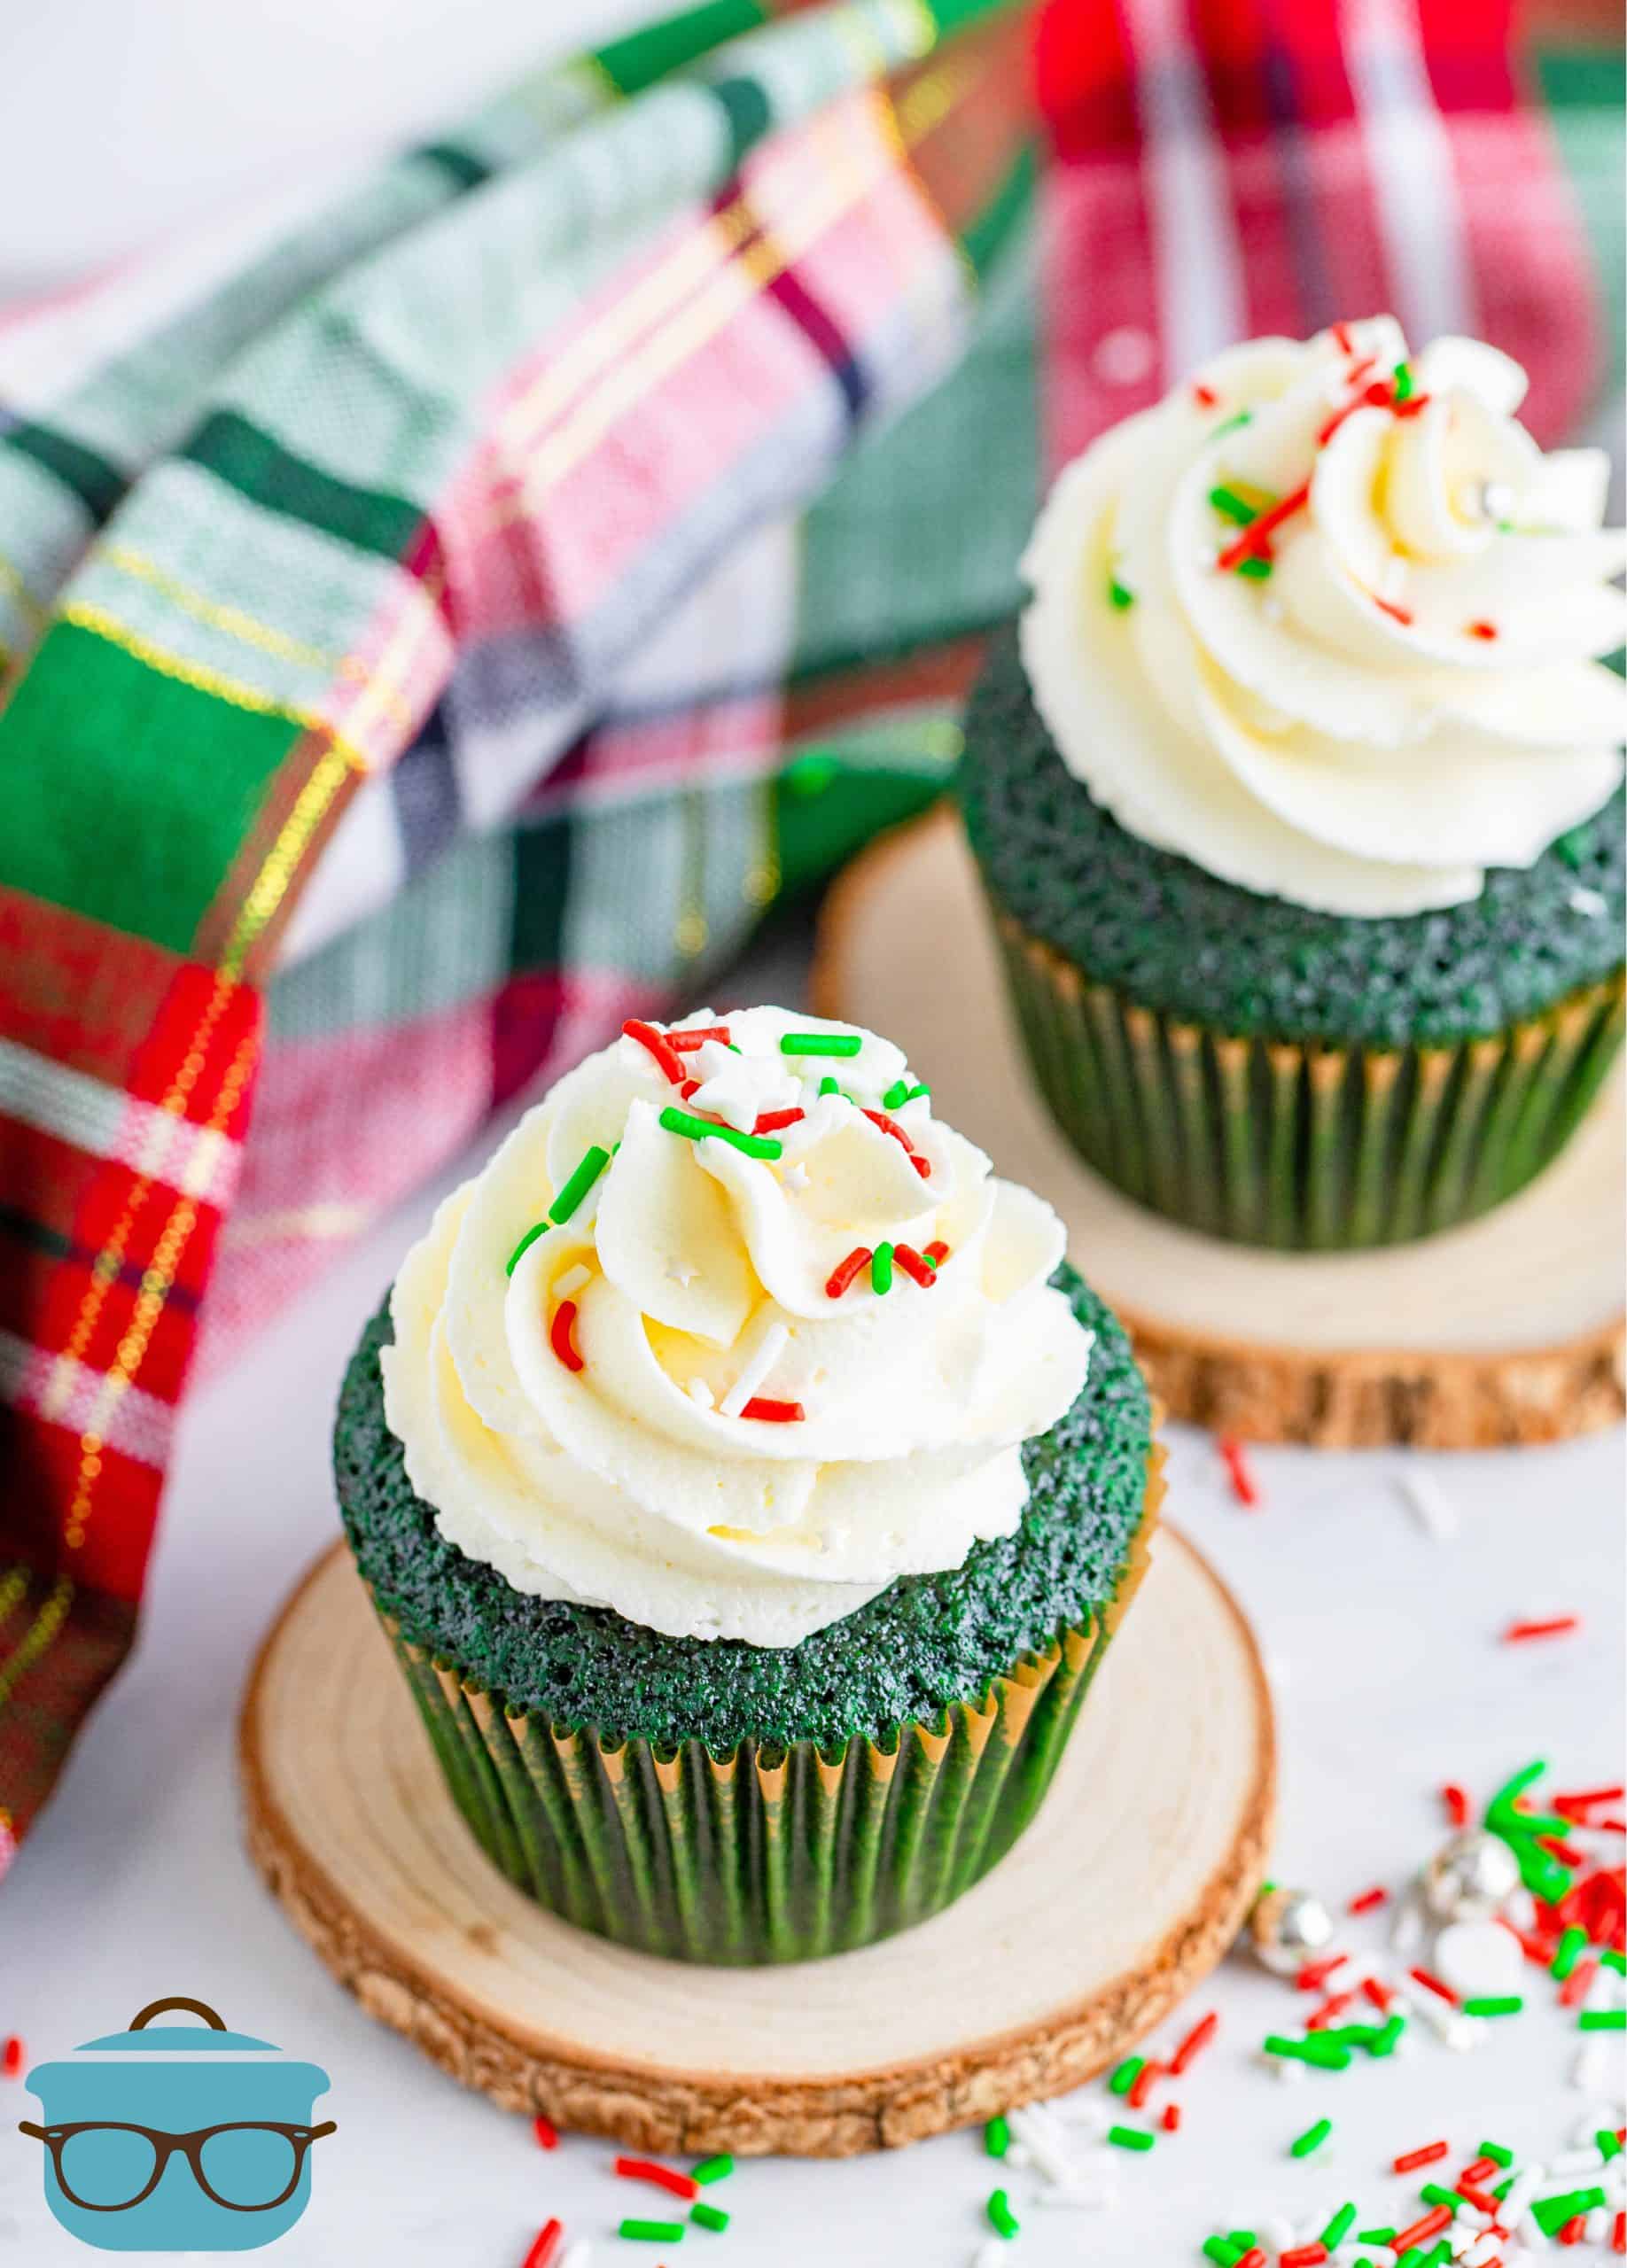 two green velvet cupcakes with buttercream frosting displayed on two small circular wooden discs with a plaid dish towel in the background.